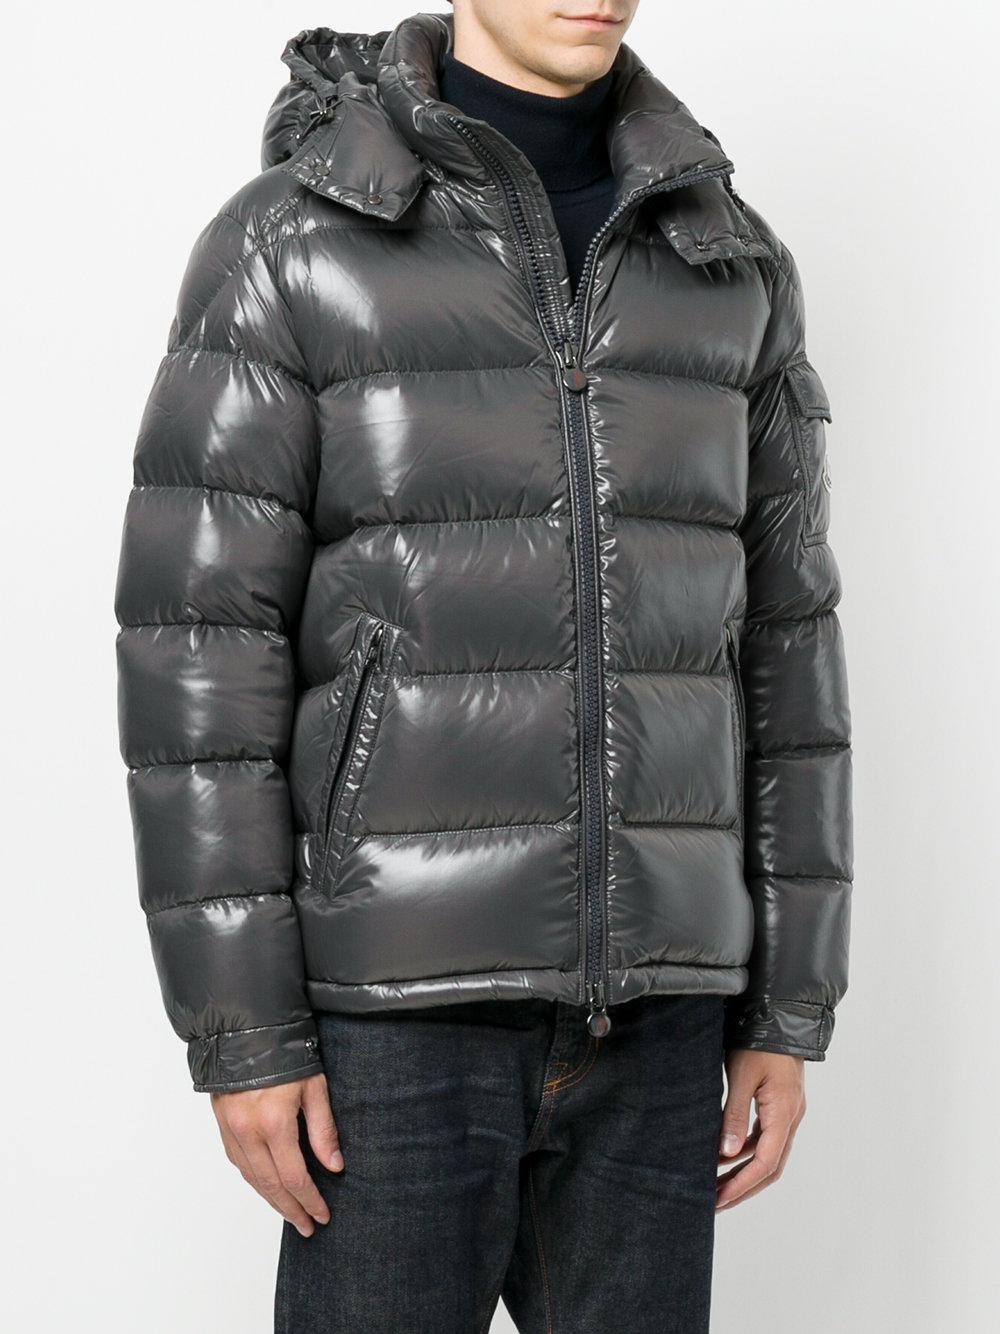 Moncler Synthetic Maya Padded Jacket in Grey (Gray) for Men - Lyst